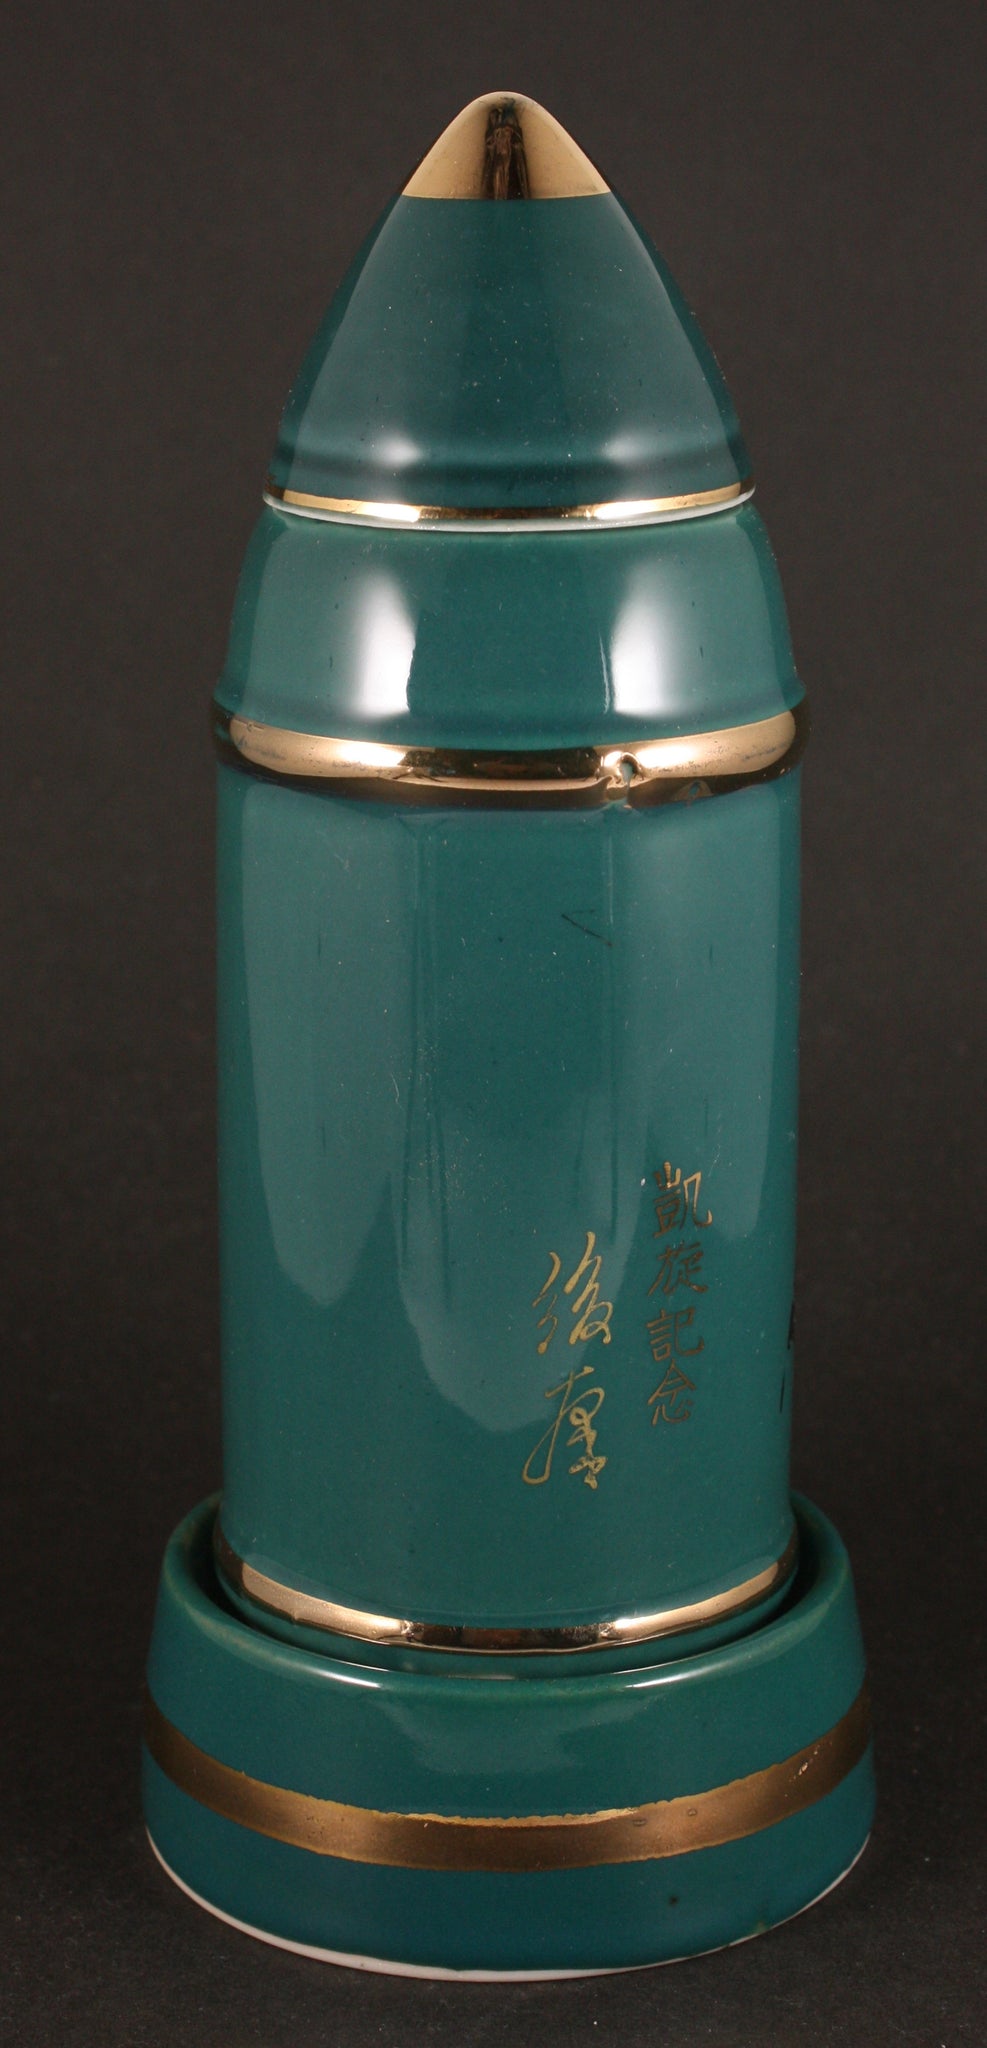 Rare Antique Japanese Military Shell Shaped Artillery 3 Piece Army Sake Bottle